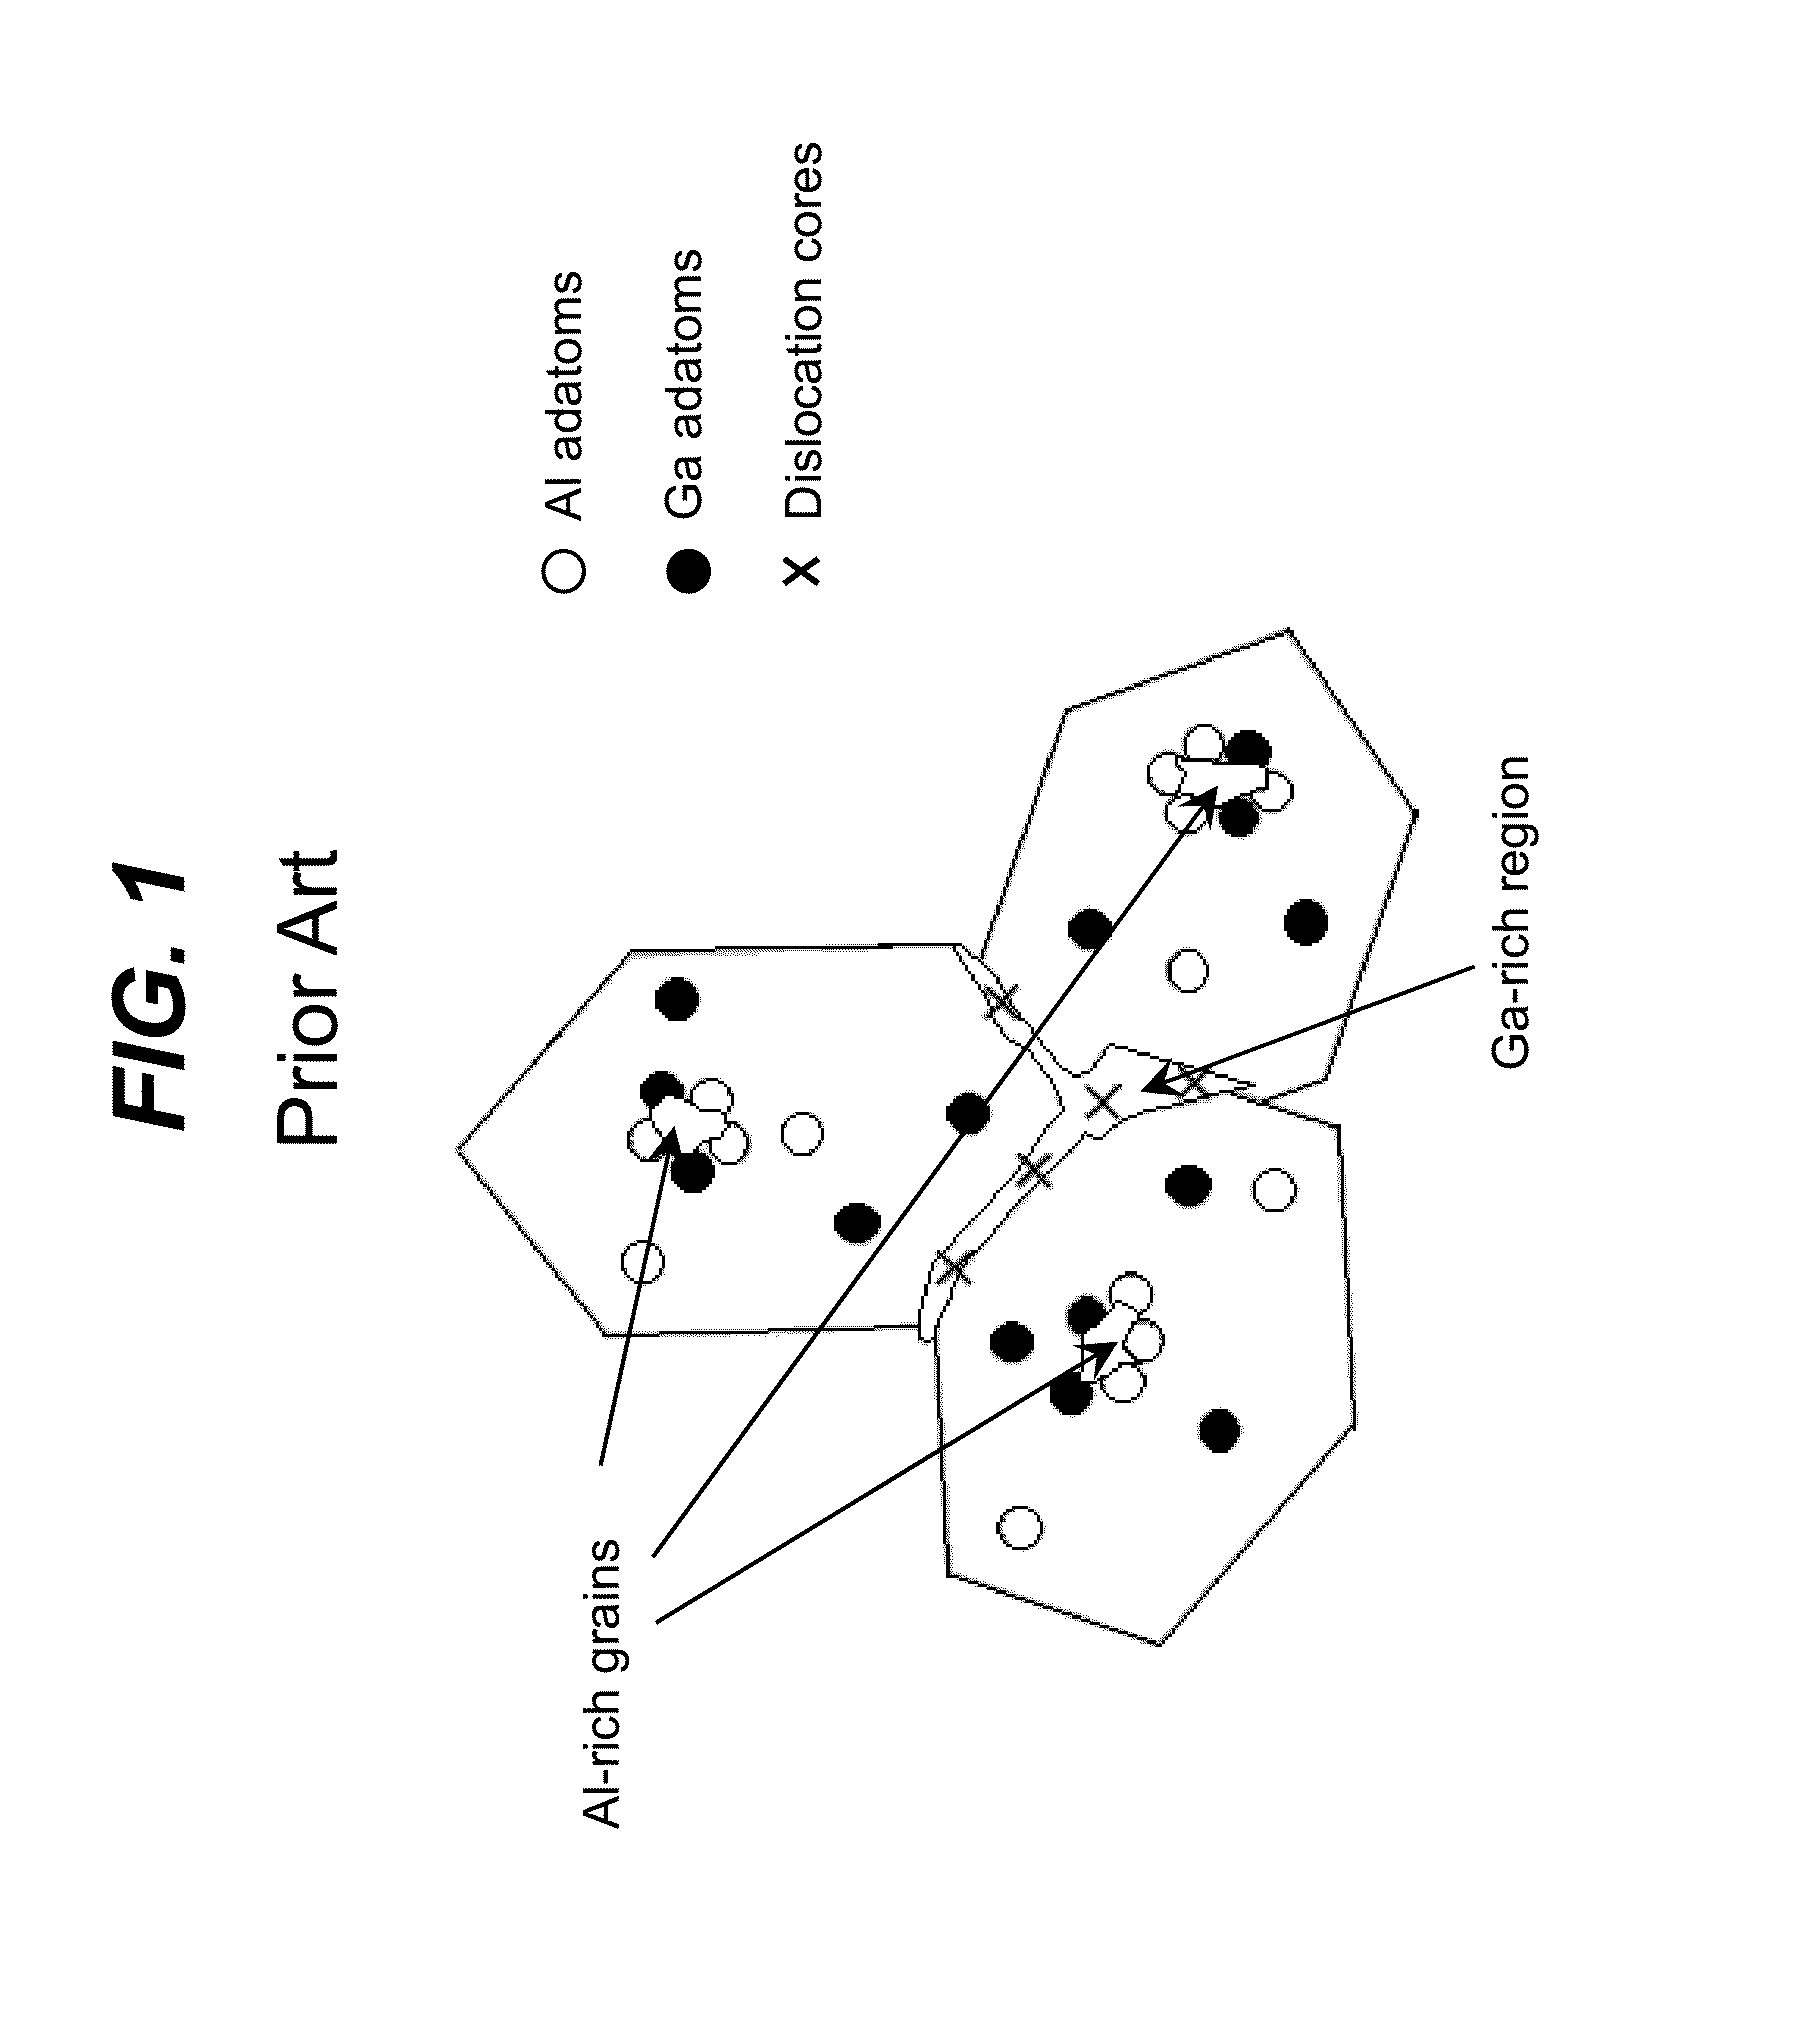 Device with Transparent and Higher Conductive Regions in Lateral Cross Section of Semiconductor Layer